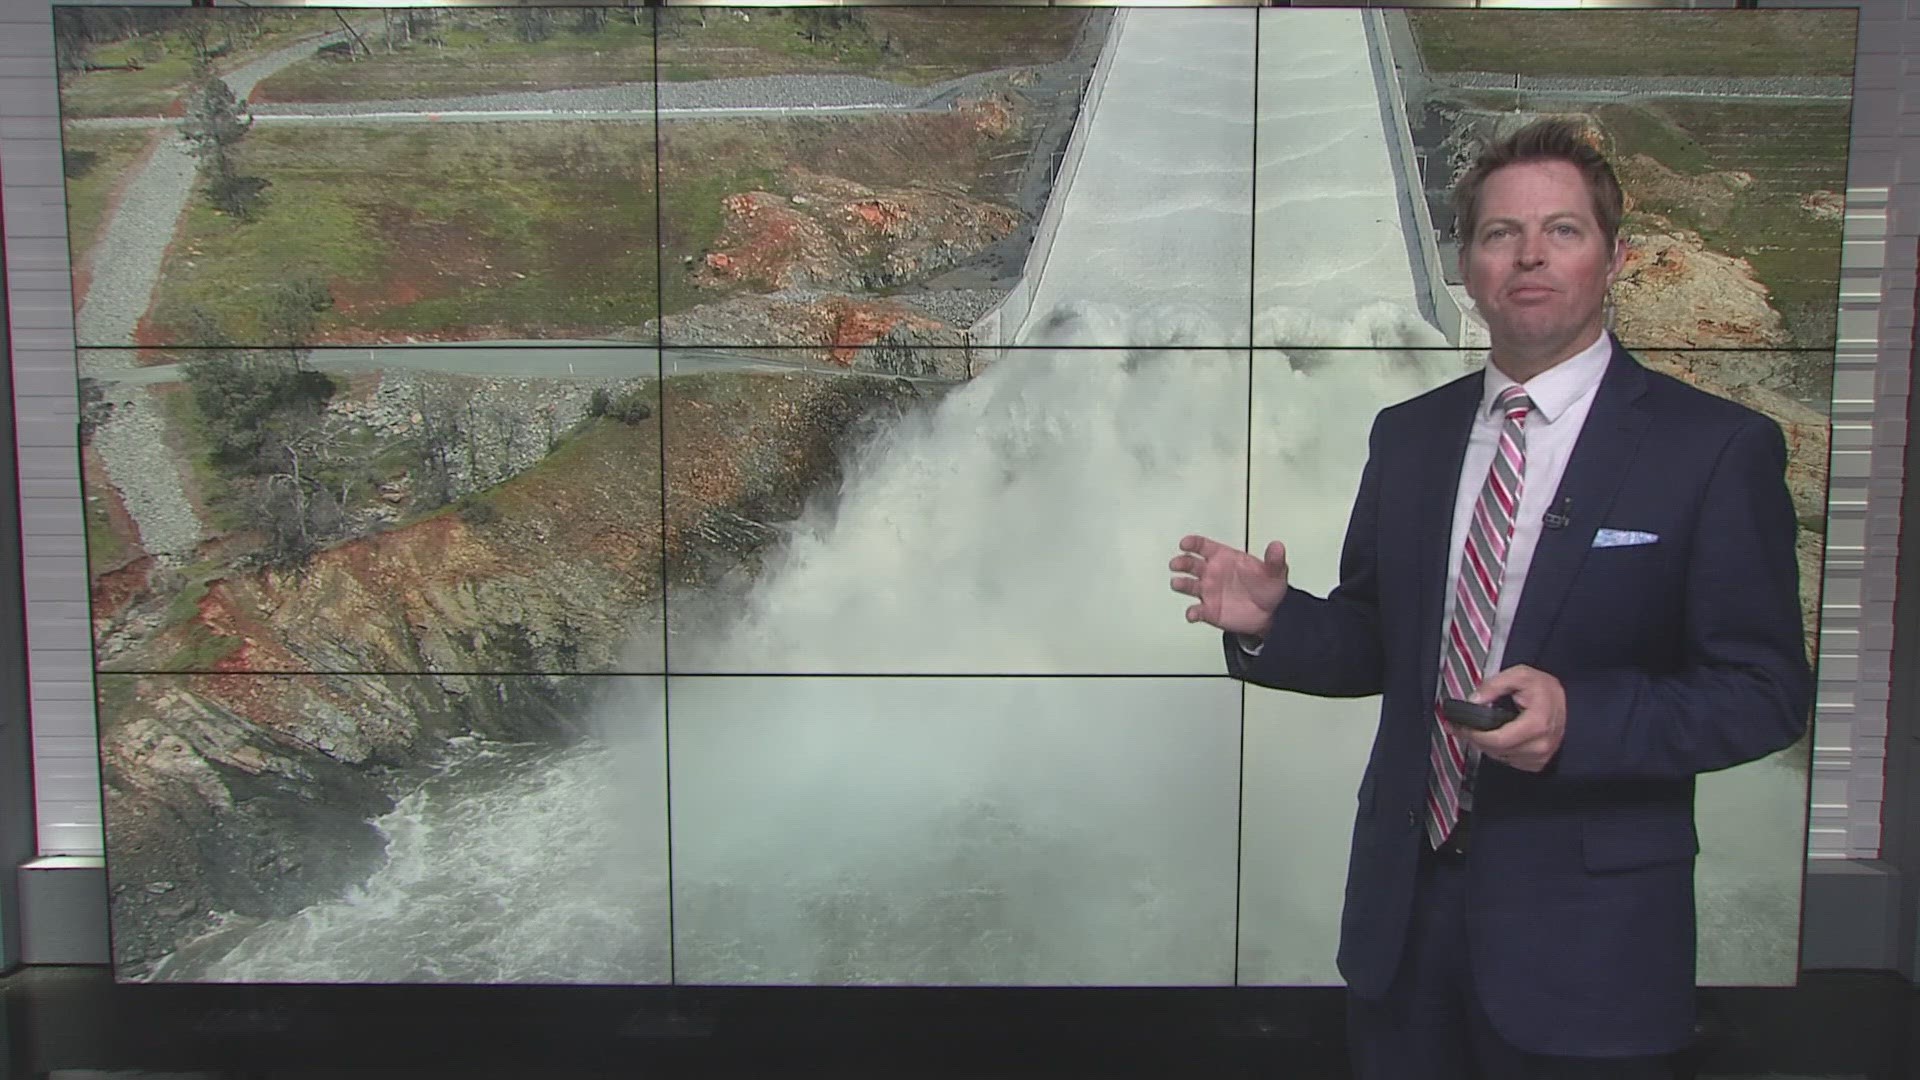 With more rain on the way, the water release from Oroville Dam is meant to make room.